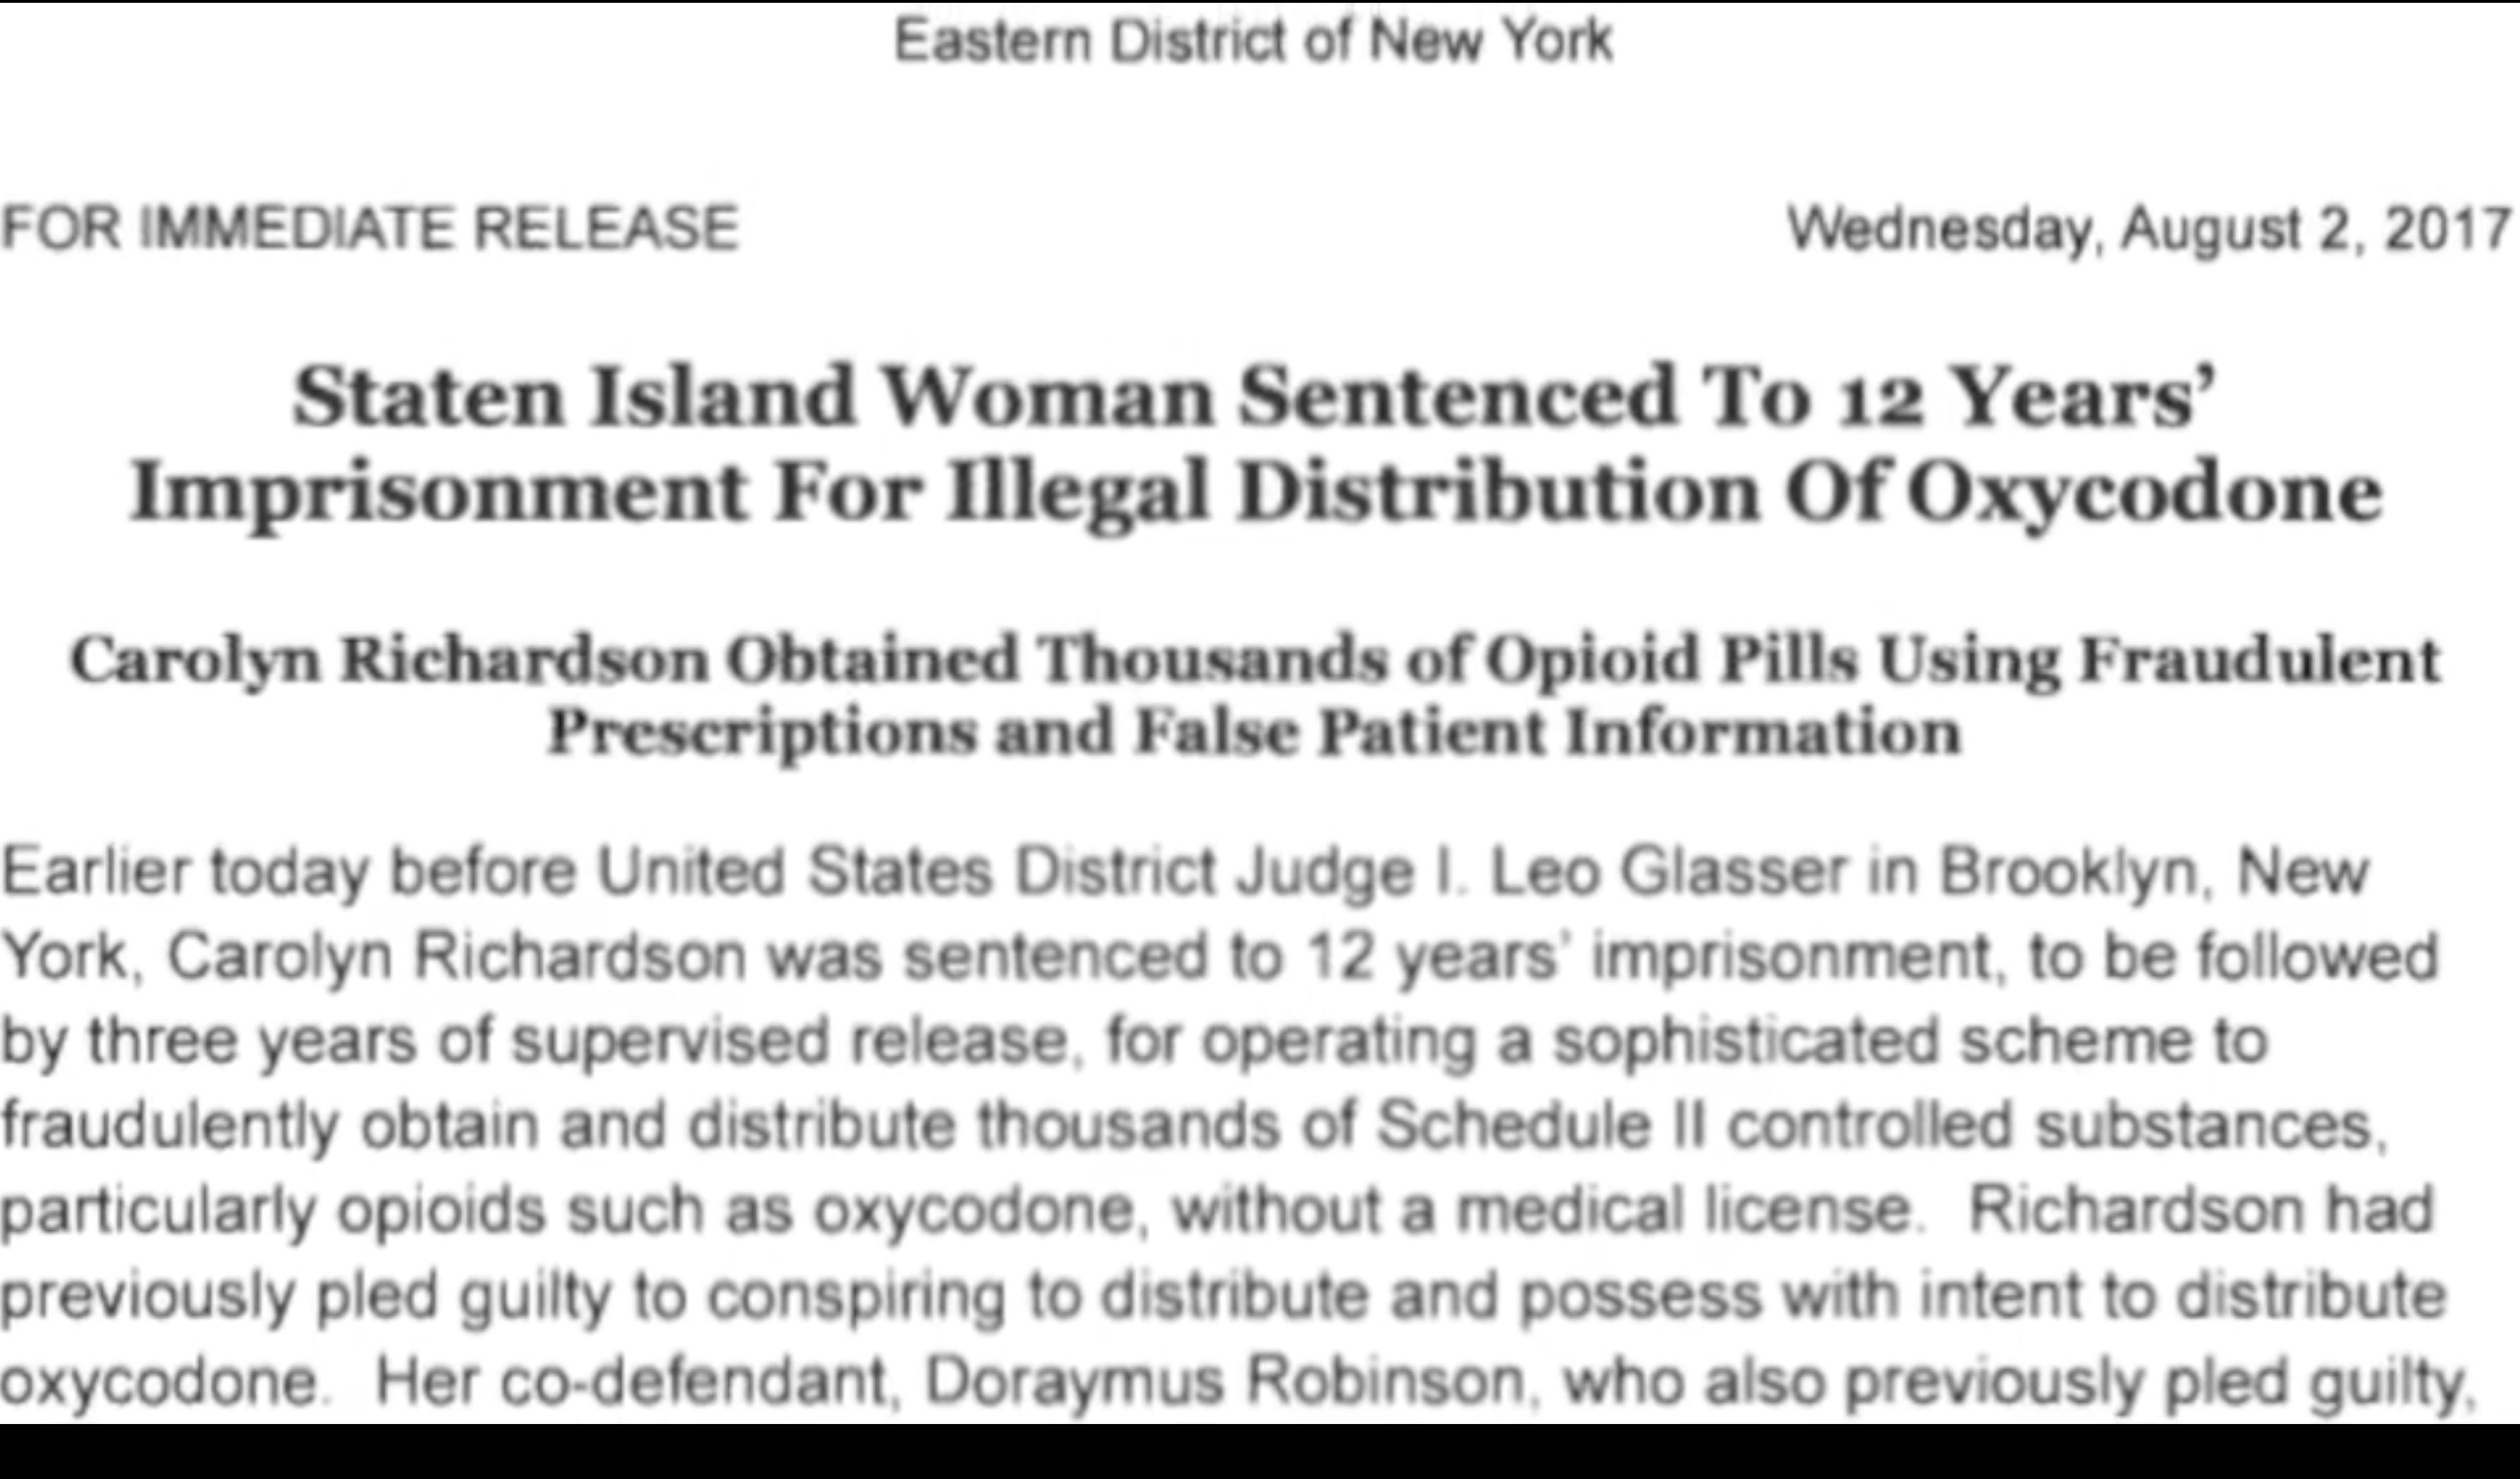 Staten Island Woman sentenced to 12 years imprisonment for illegal distribution of oxycodone